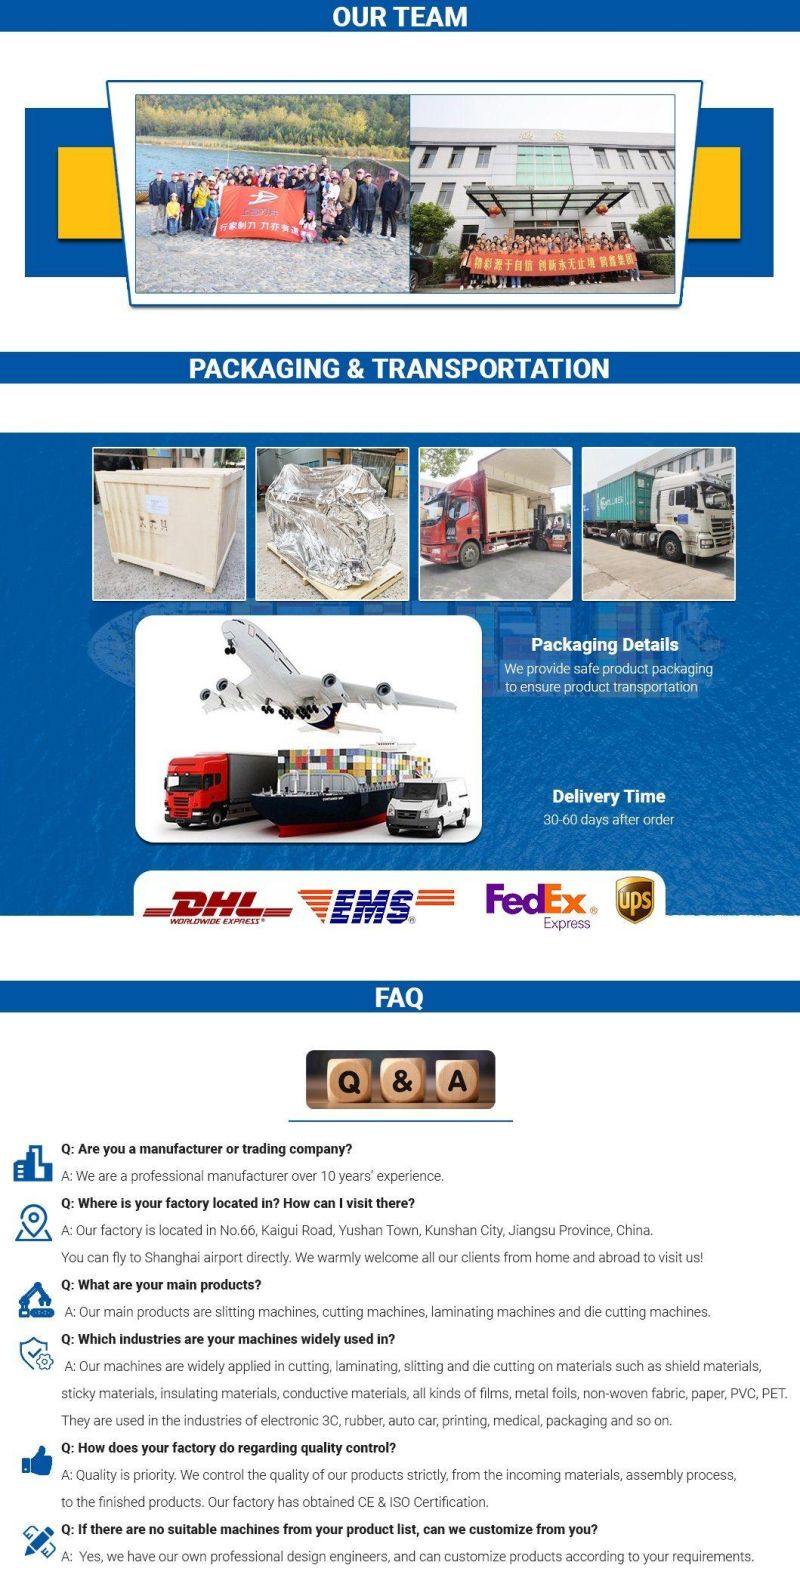 Hx-360X+Y Double Sided Tape Automatic Sheeting Machine